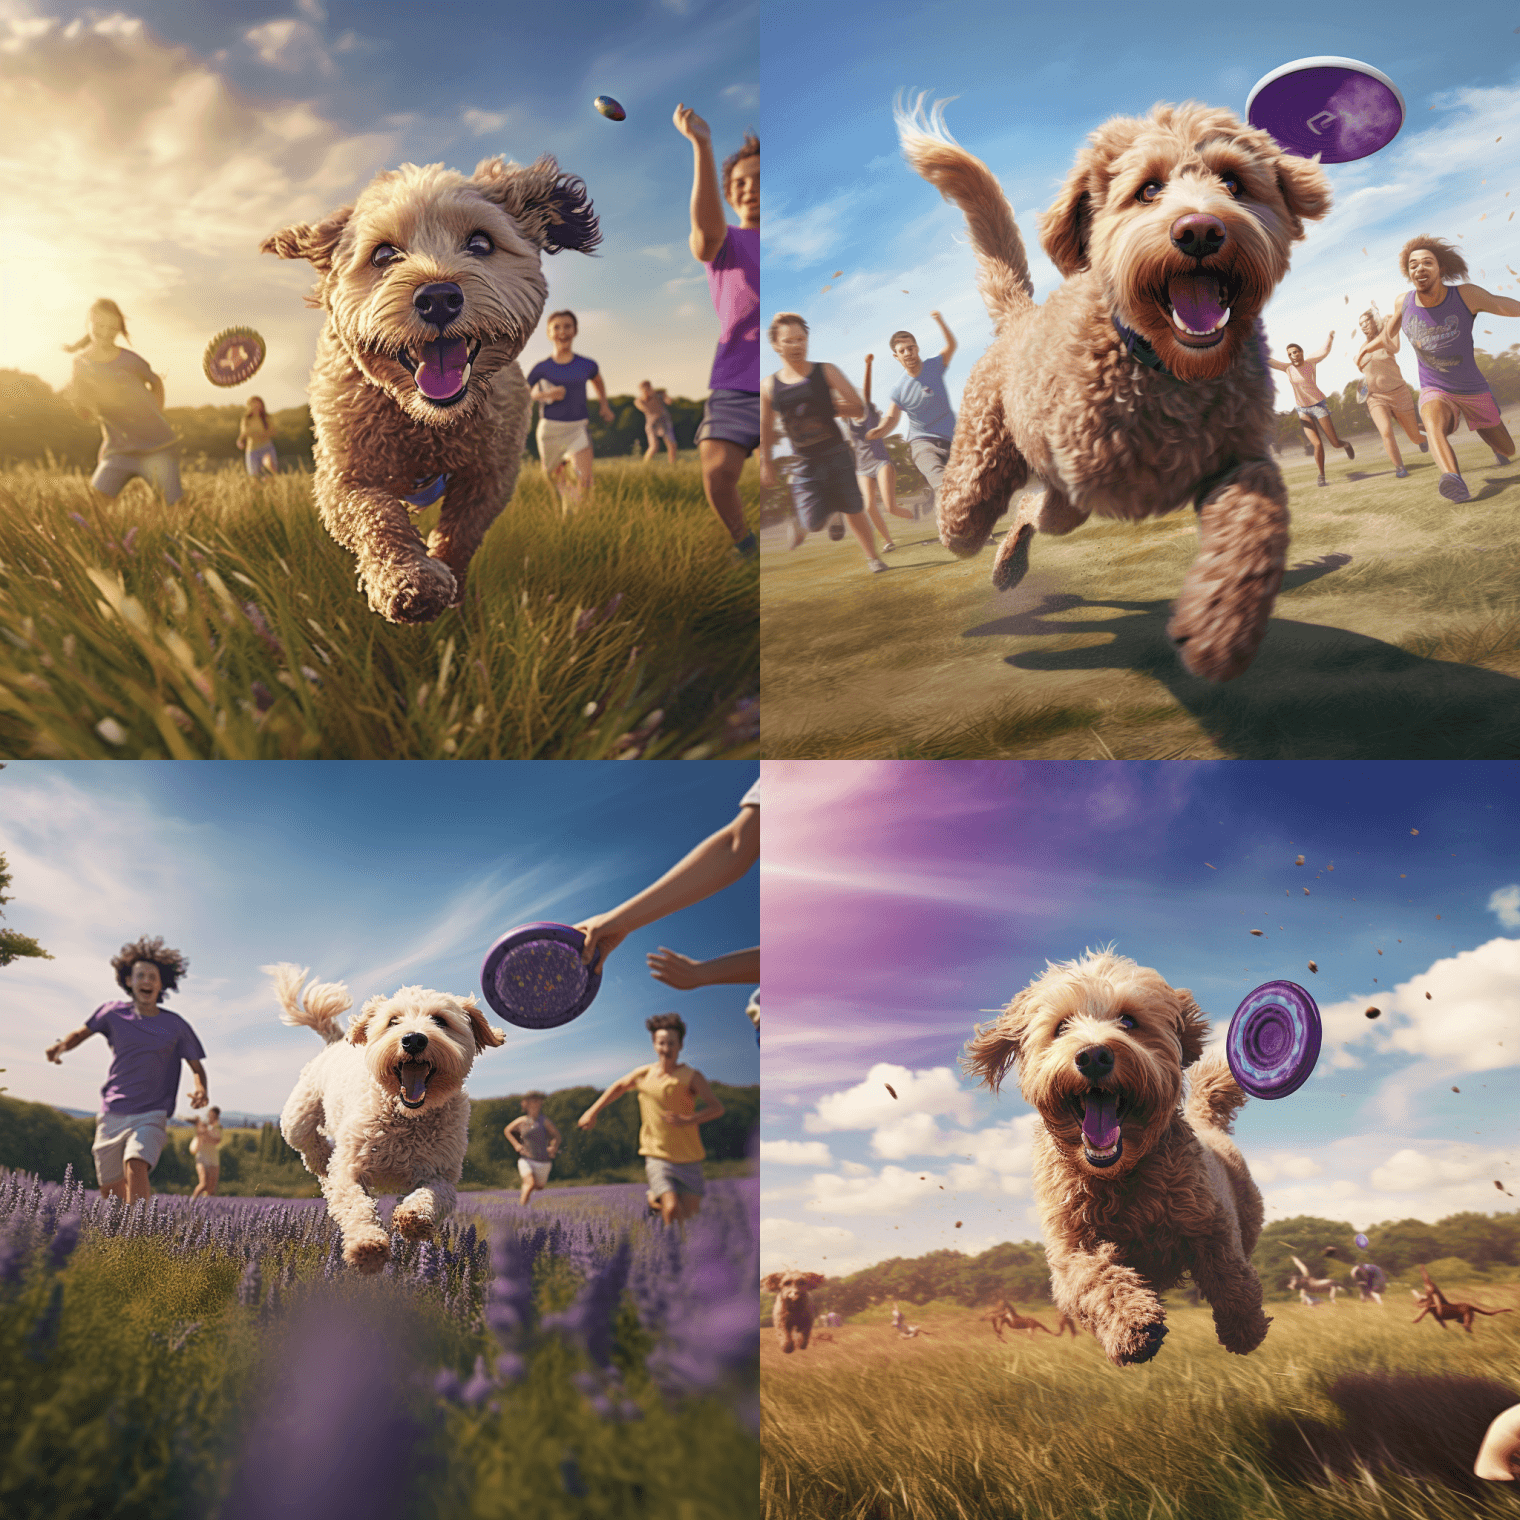 A Labradoodle dog chasing a frisbee while running in a field that’s surrounded by happy people